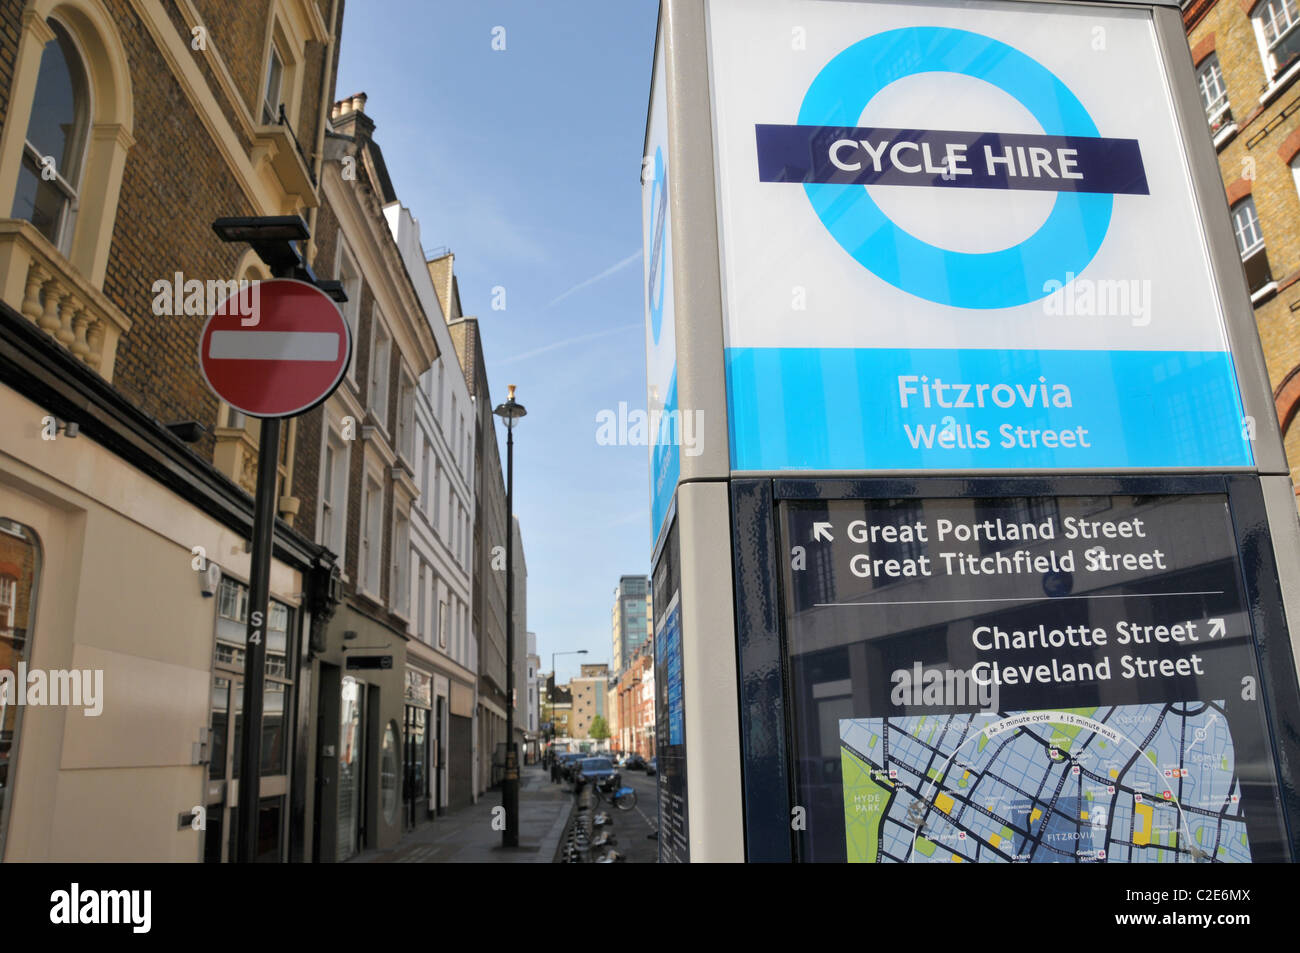 Londres Barclays Cycle Hire Fitzrovia Londres rue sans issue Banque D'Images